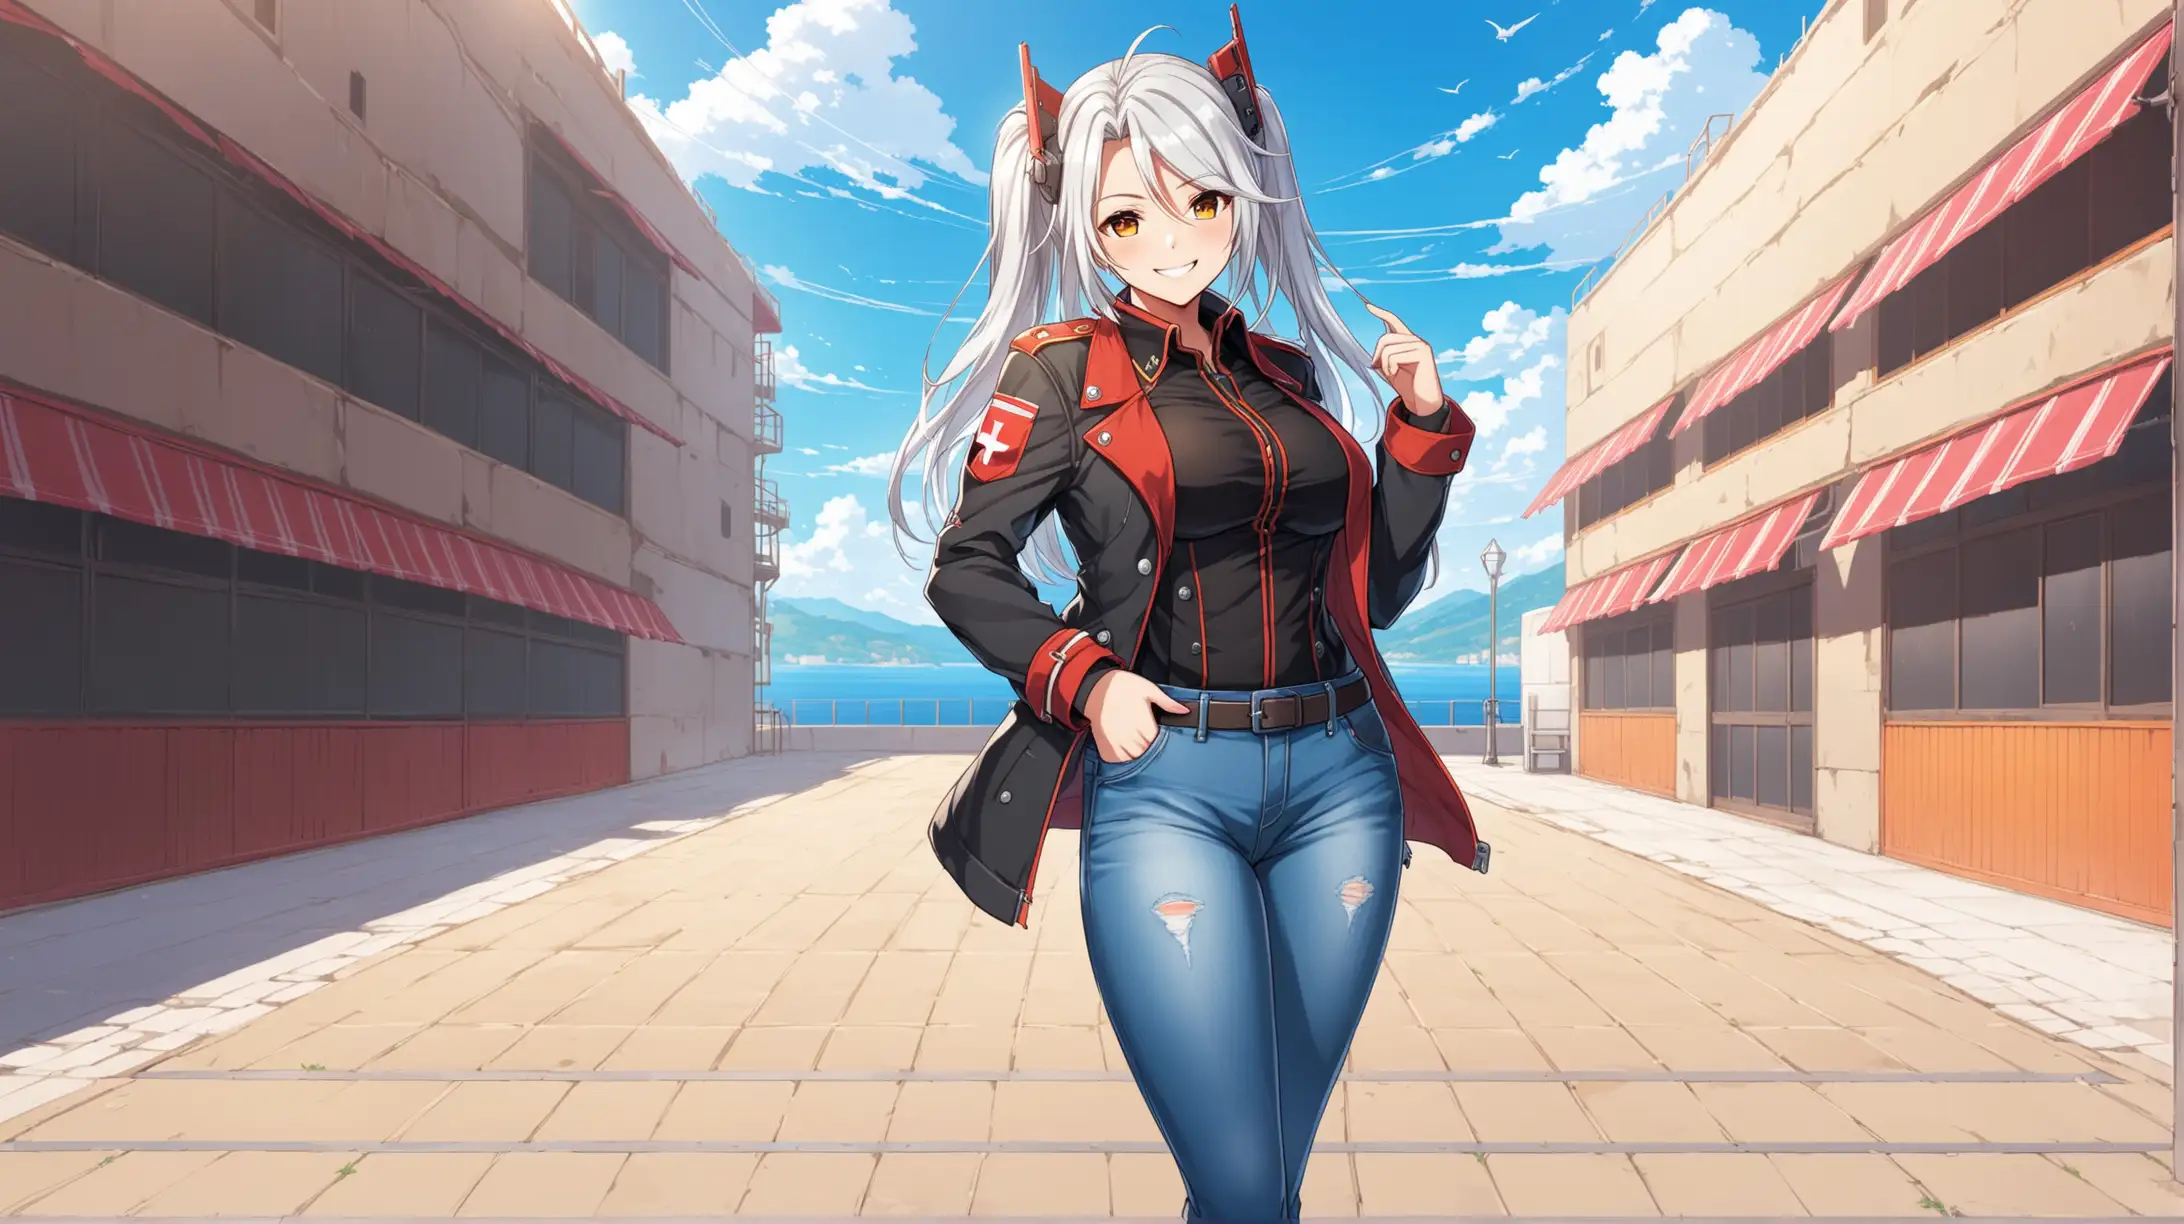 Draw the character Prinz Eugen from the game Azur Lane standing alone outside on a sunny day wearing jeans and a jacket while smiling at the viewer